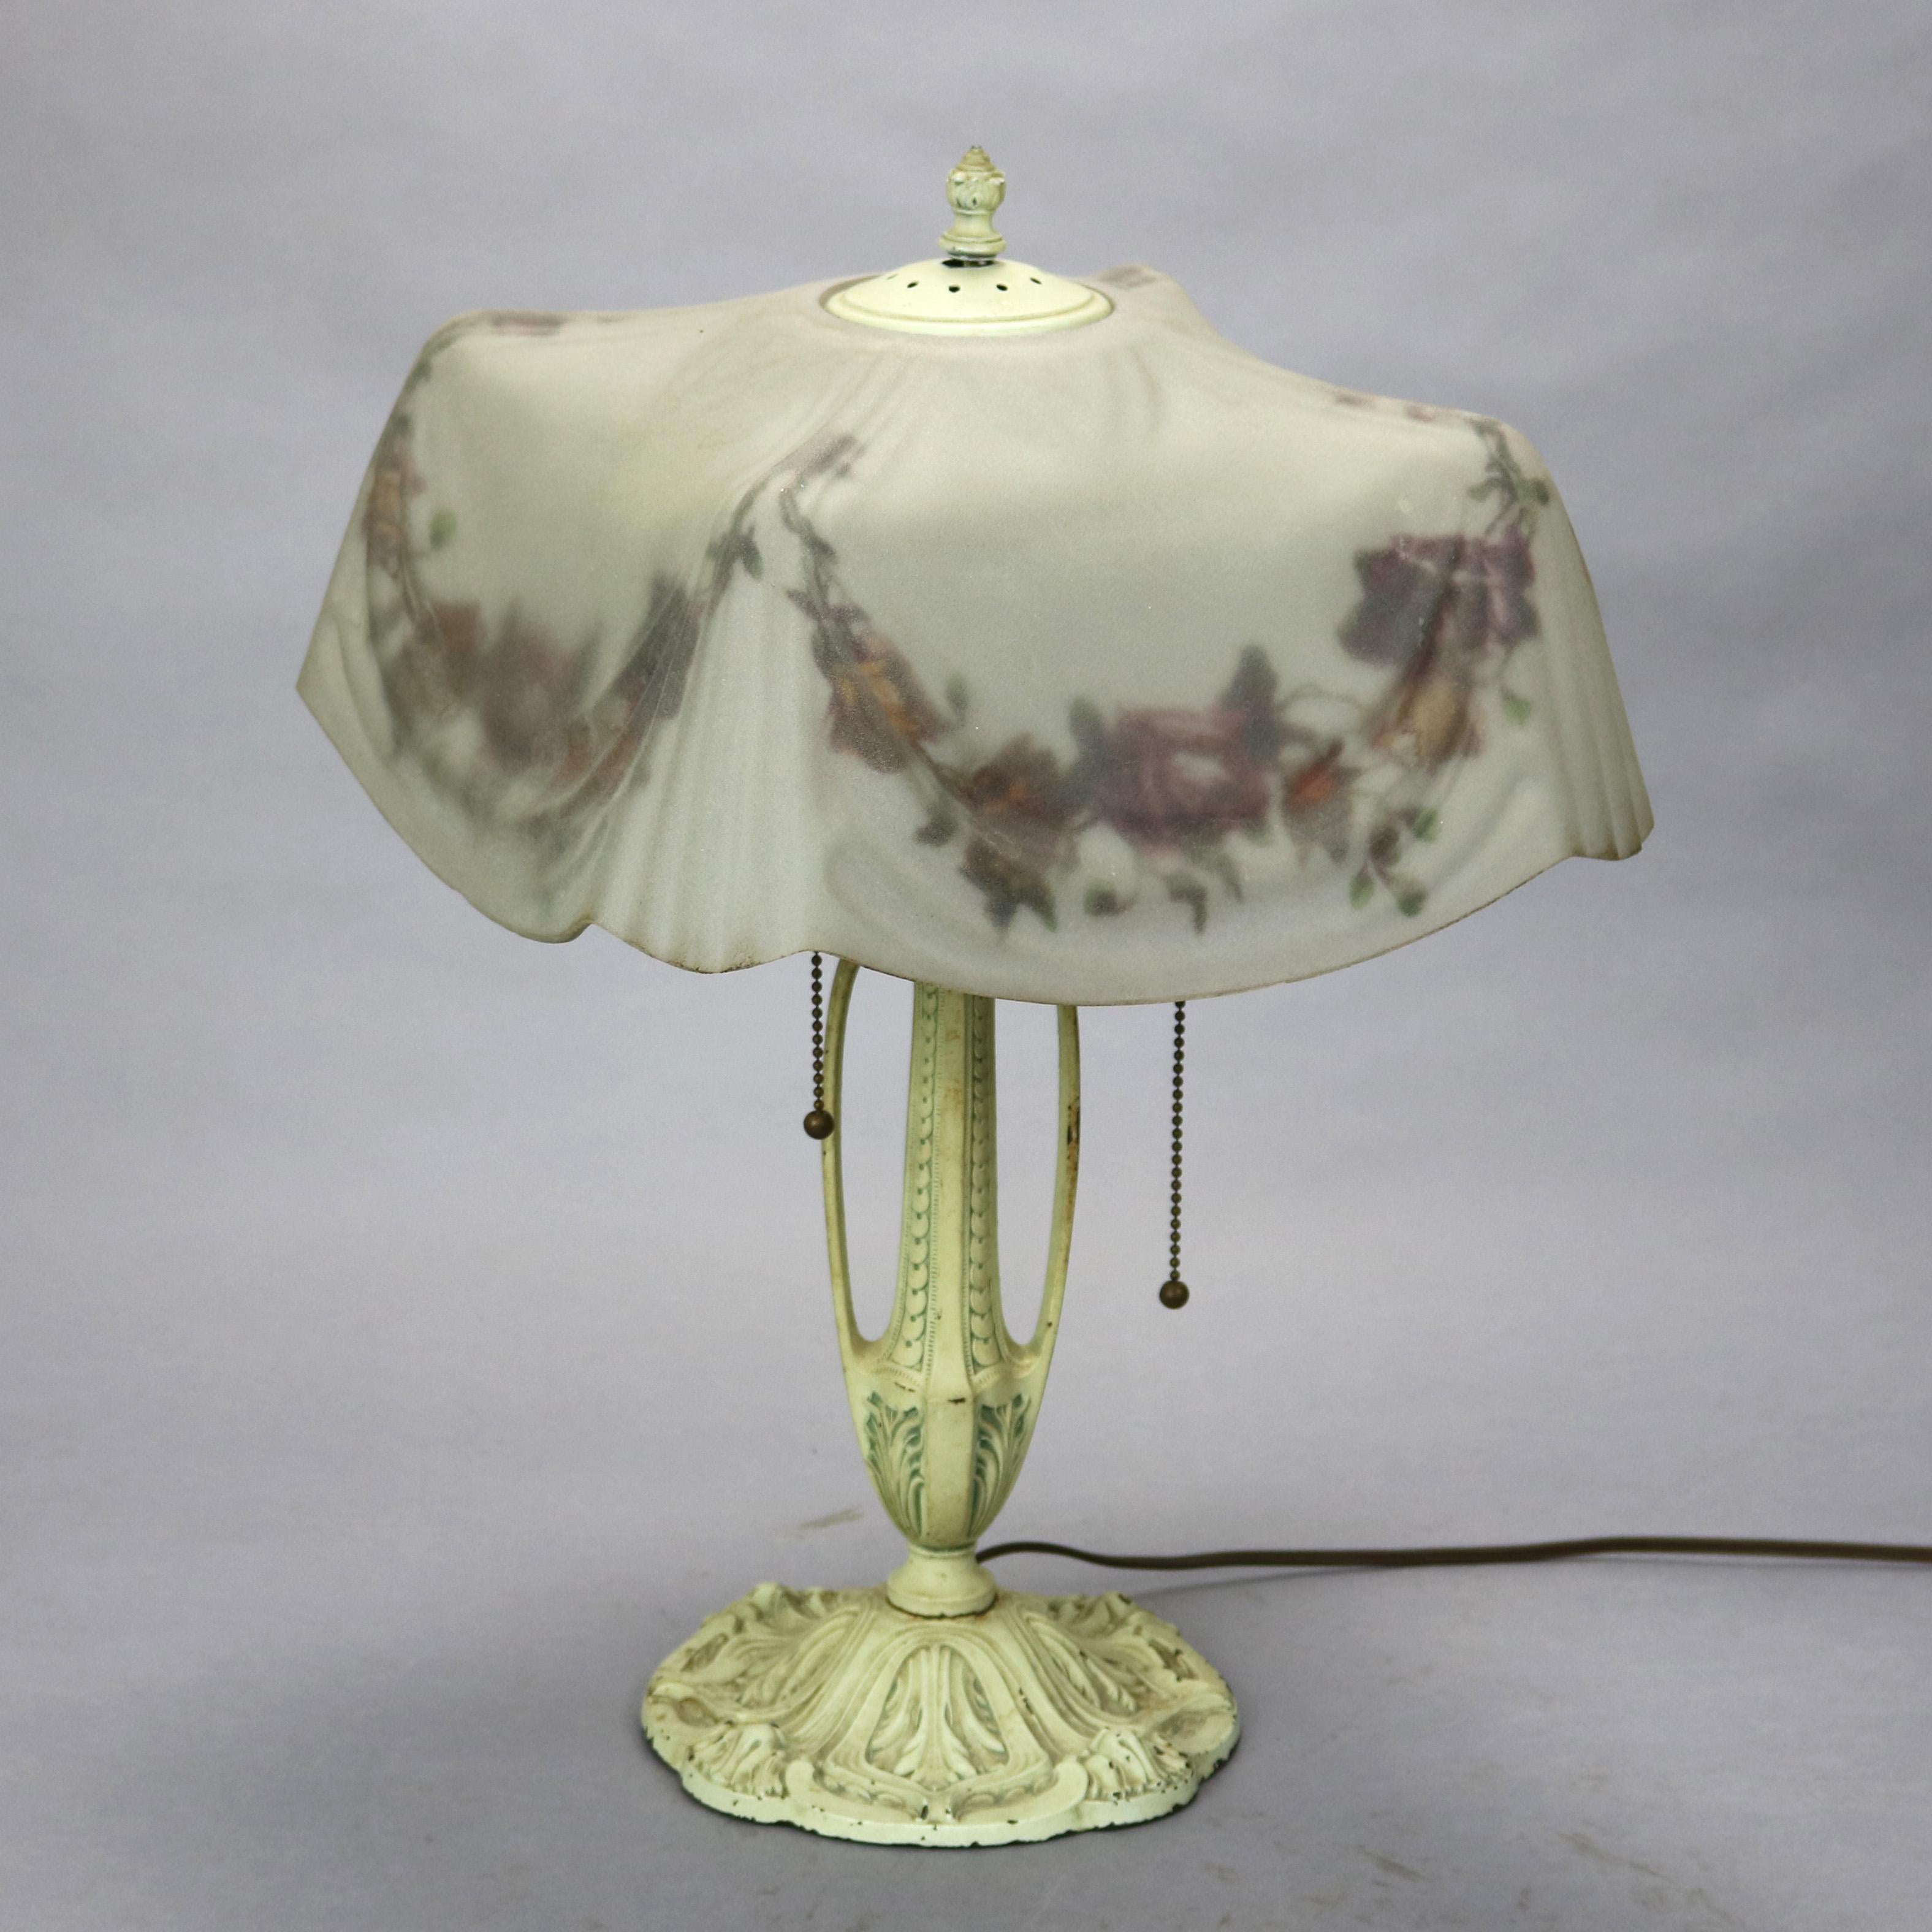 American Antique Reverse Painted Pittsburgh Table Lamp with Molded Drapery Shade, c 1910